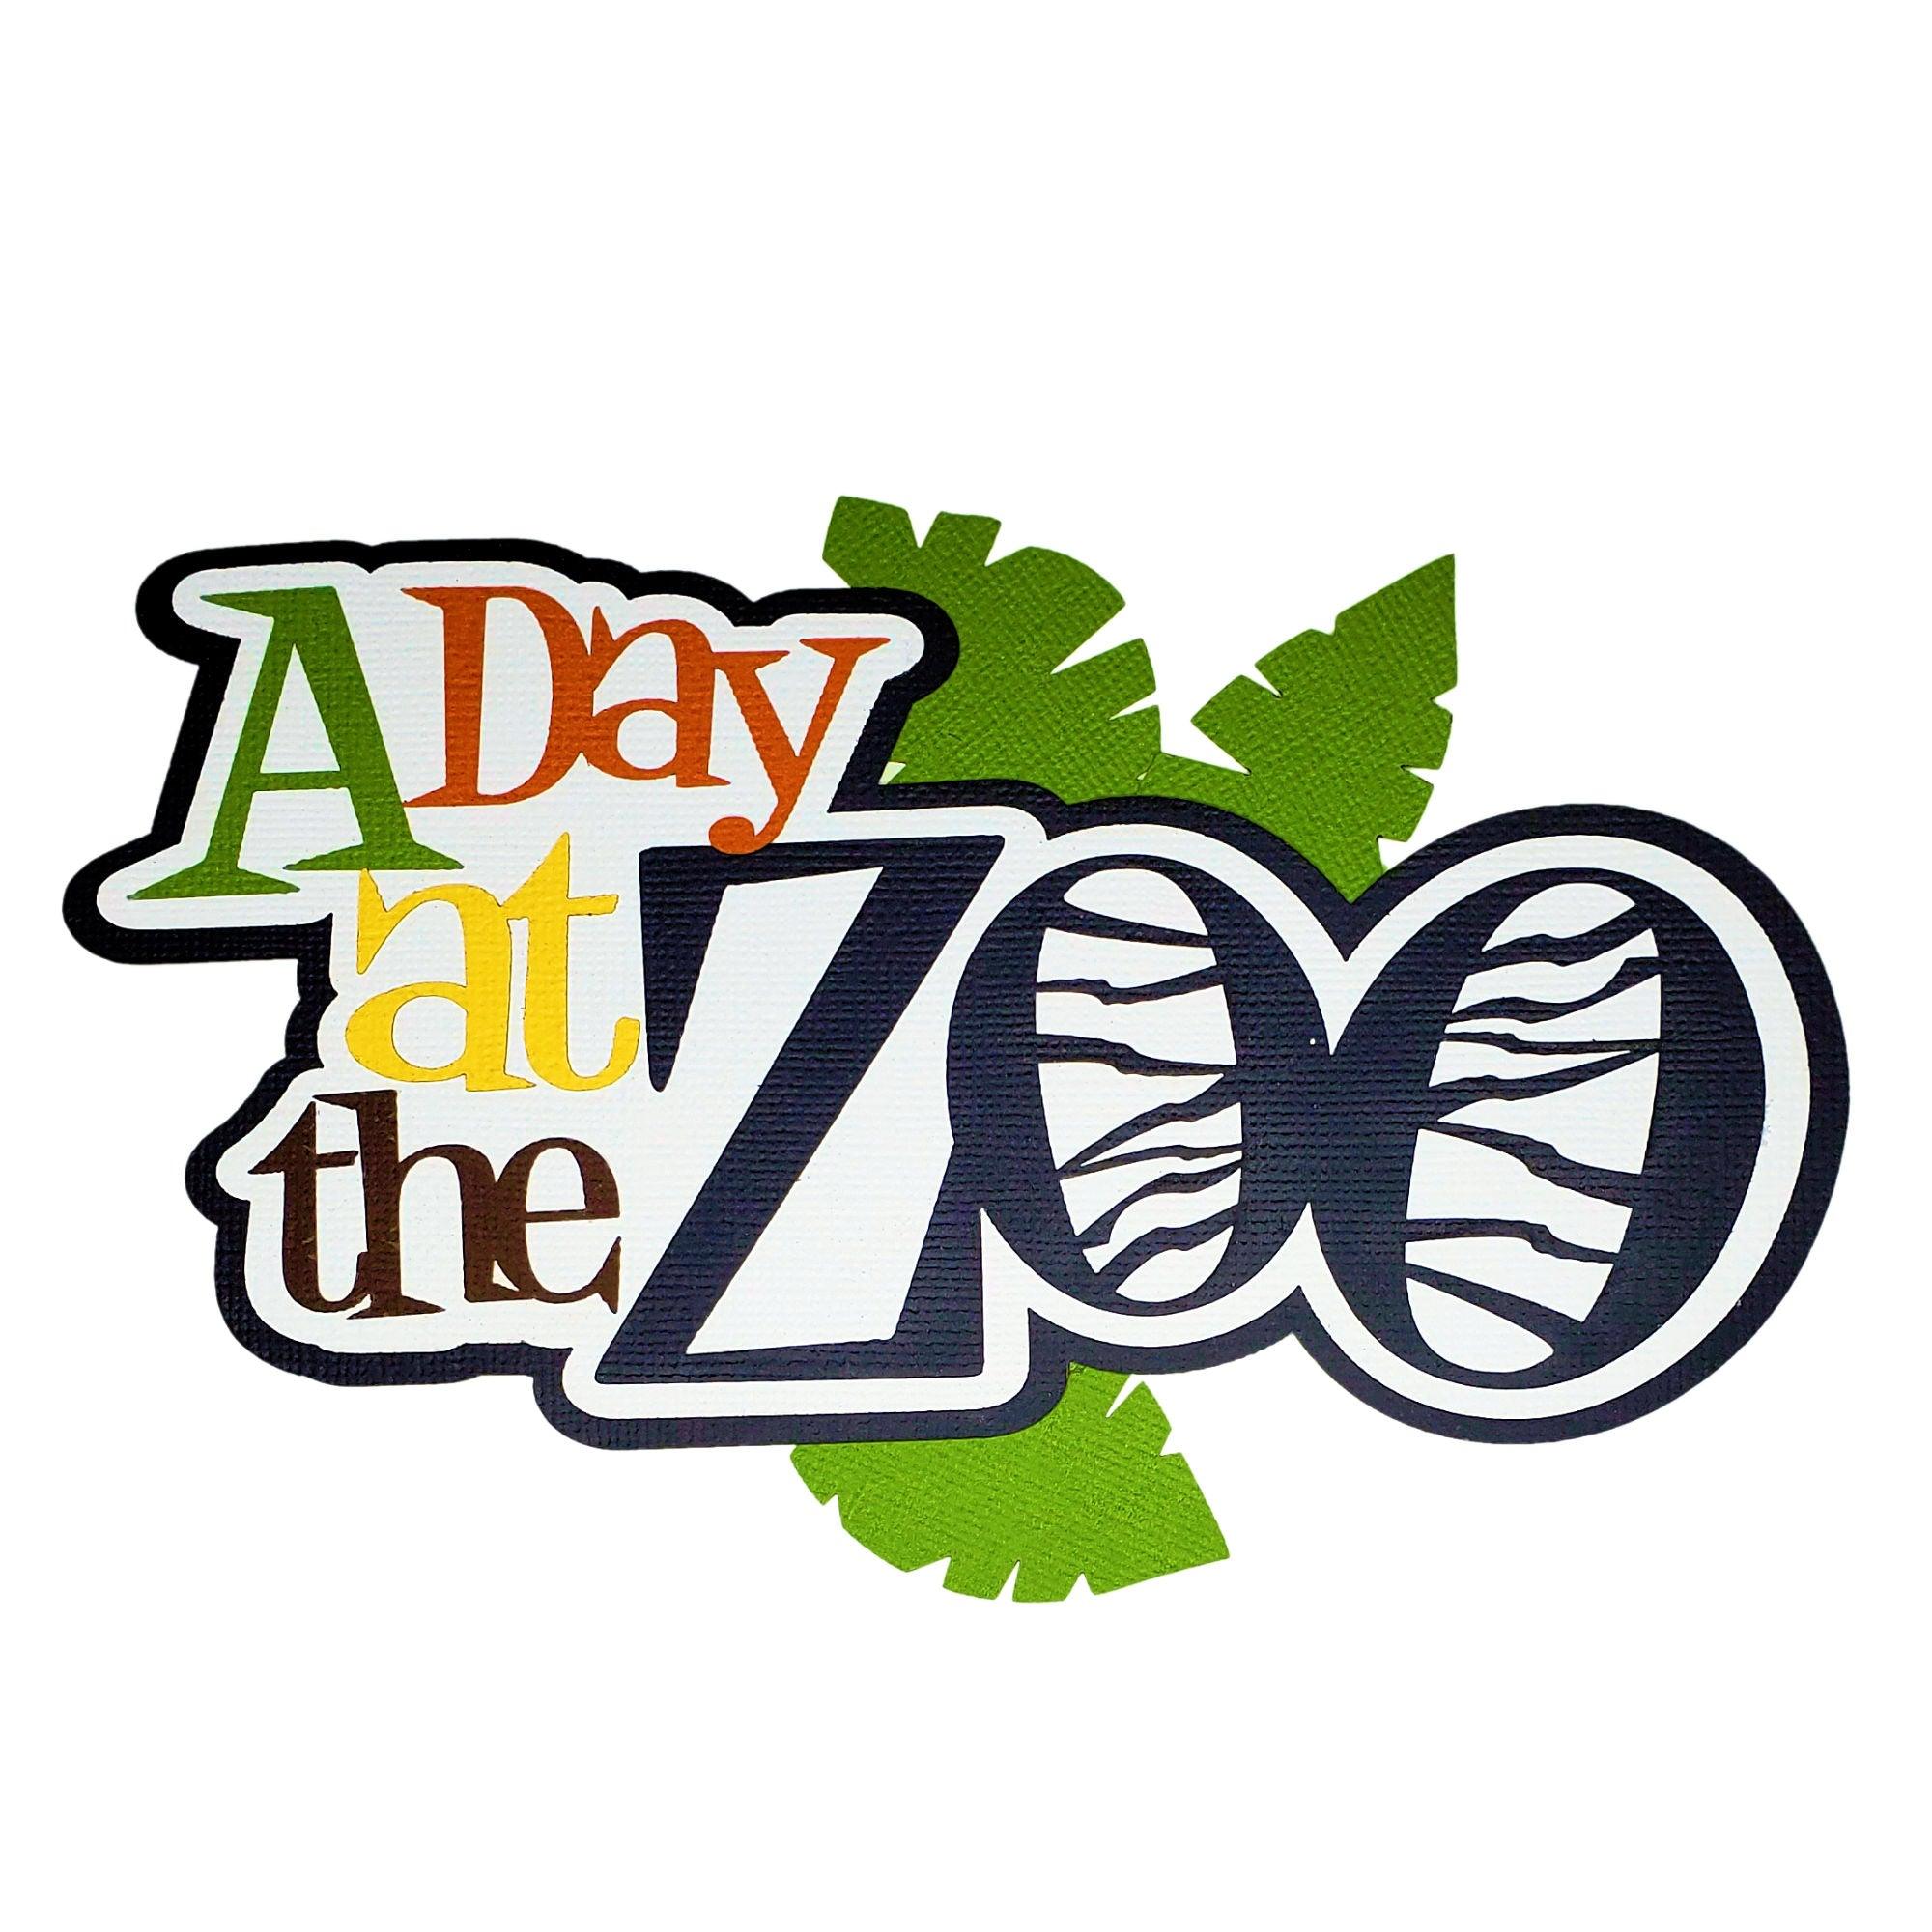 A Day At The Zoo Title Fully-Assembled 4 x 7 Laser Cut Scrapbook Embellishment by SSC Laser Designs